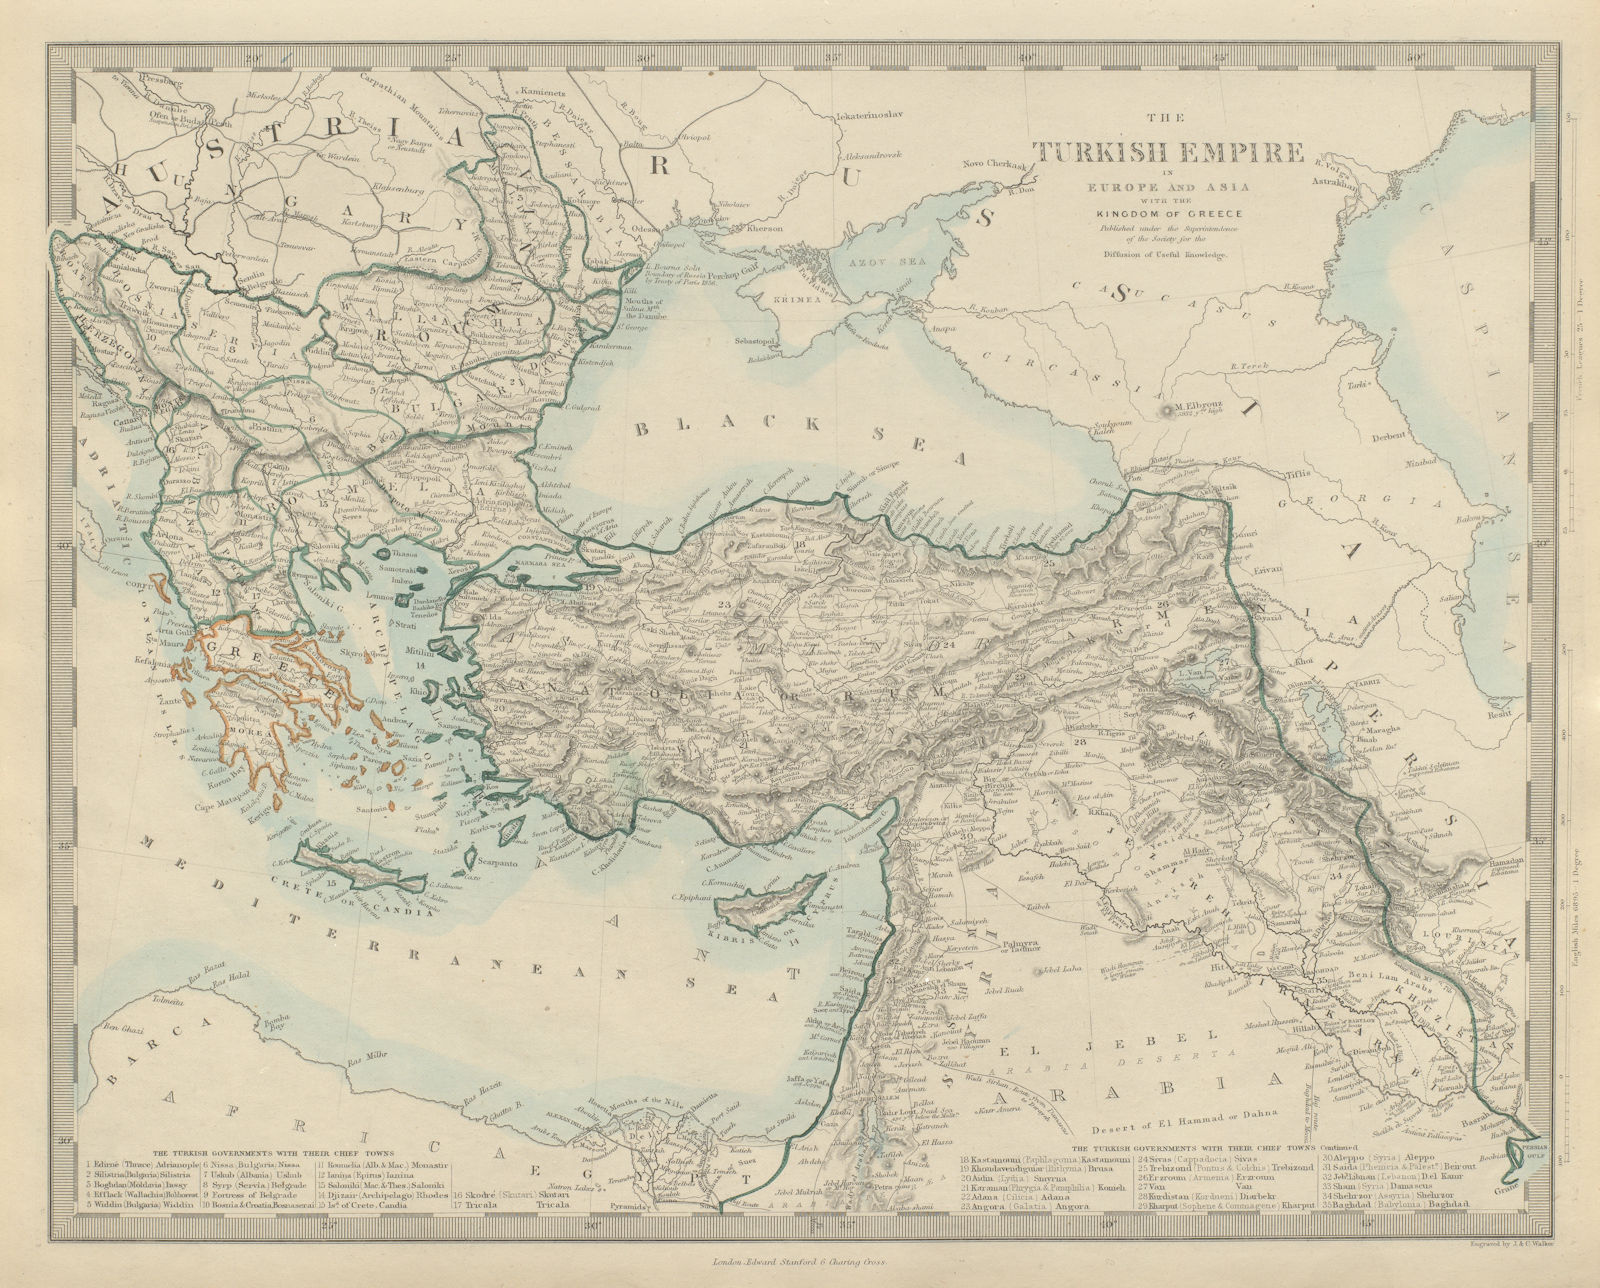 TURKISIH/OTTOMAN EMPIRE in Europe & Asia. Kingdom of Greece. SDUK 1874 old map